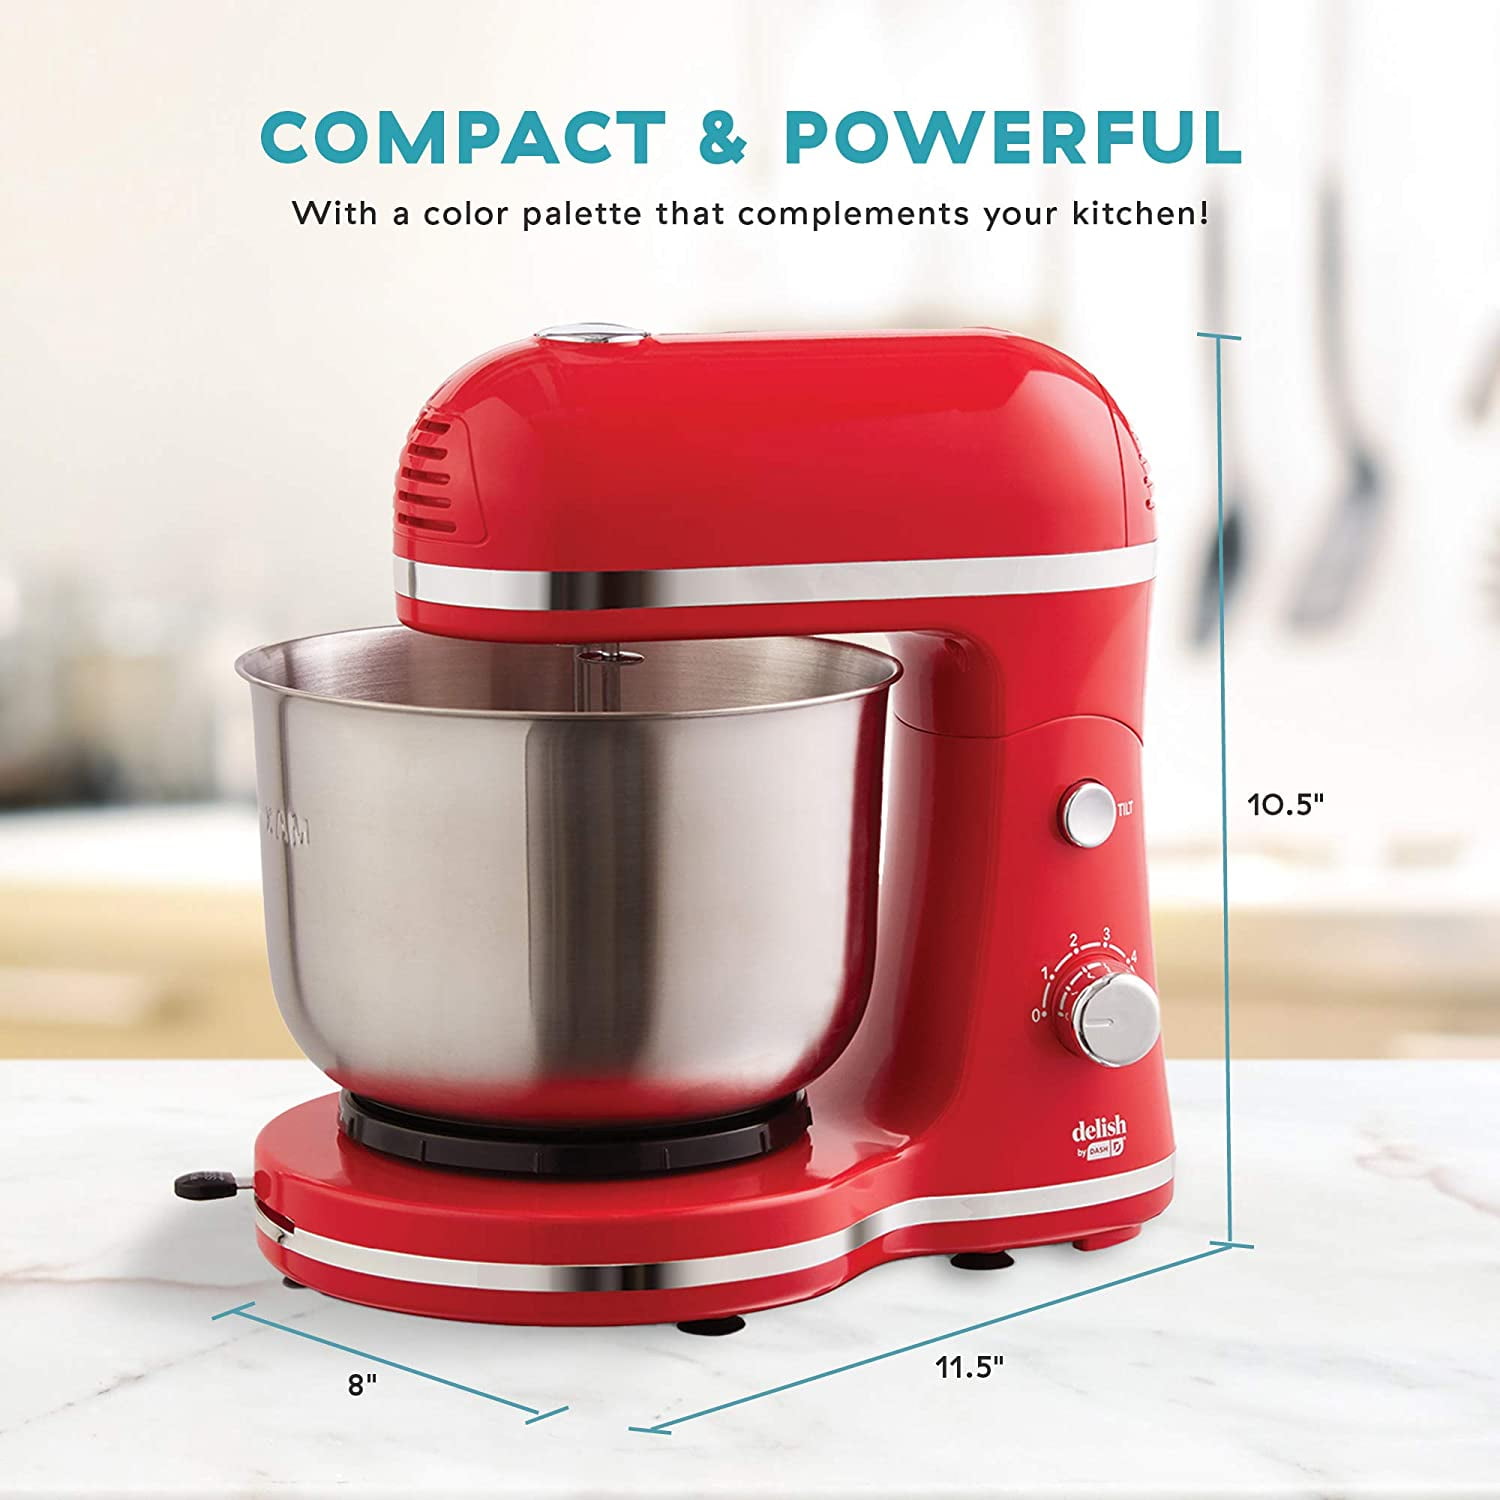 Delish by DASH Compact Stand Mixer Quart with Beaters & Dough Hooks Included - Red (DCSM350GBRD02) -